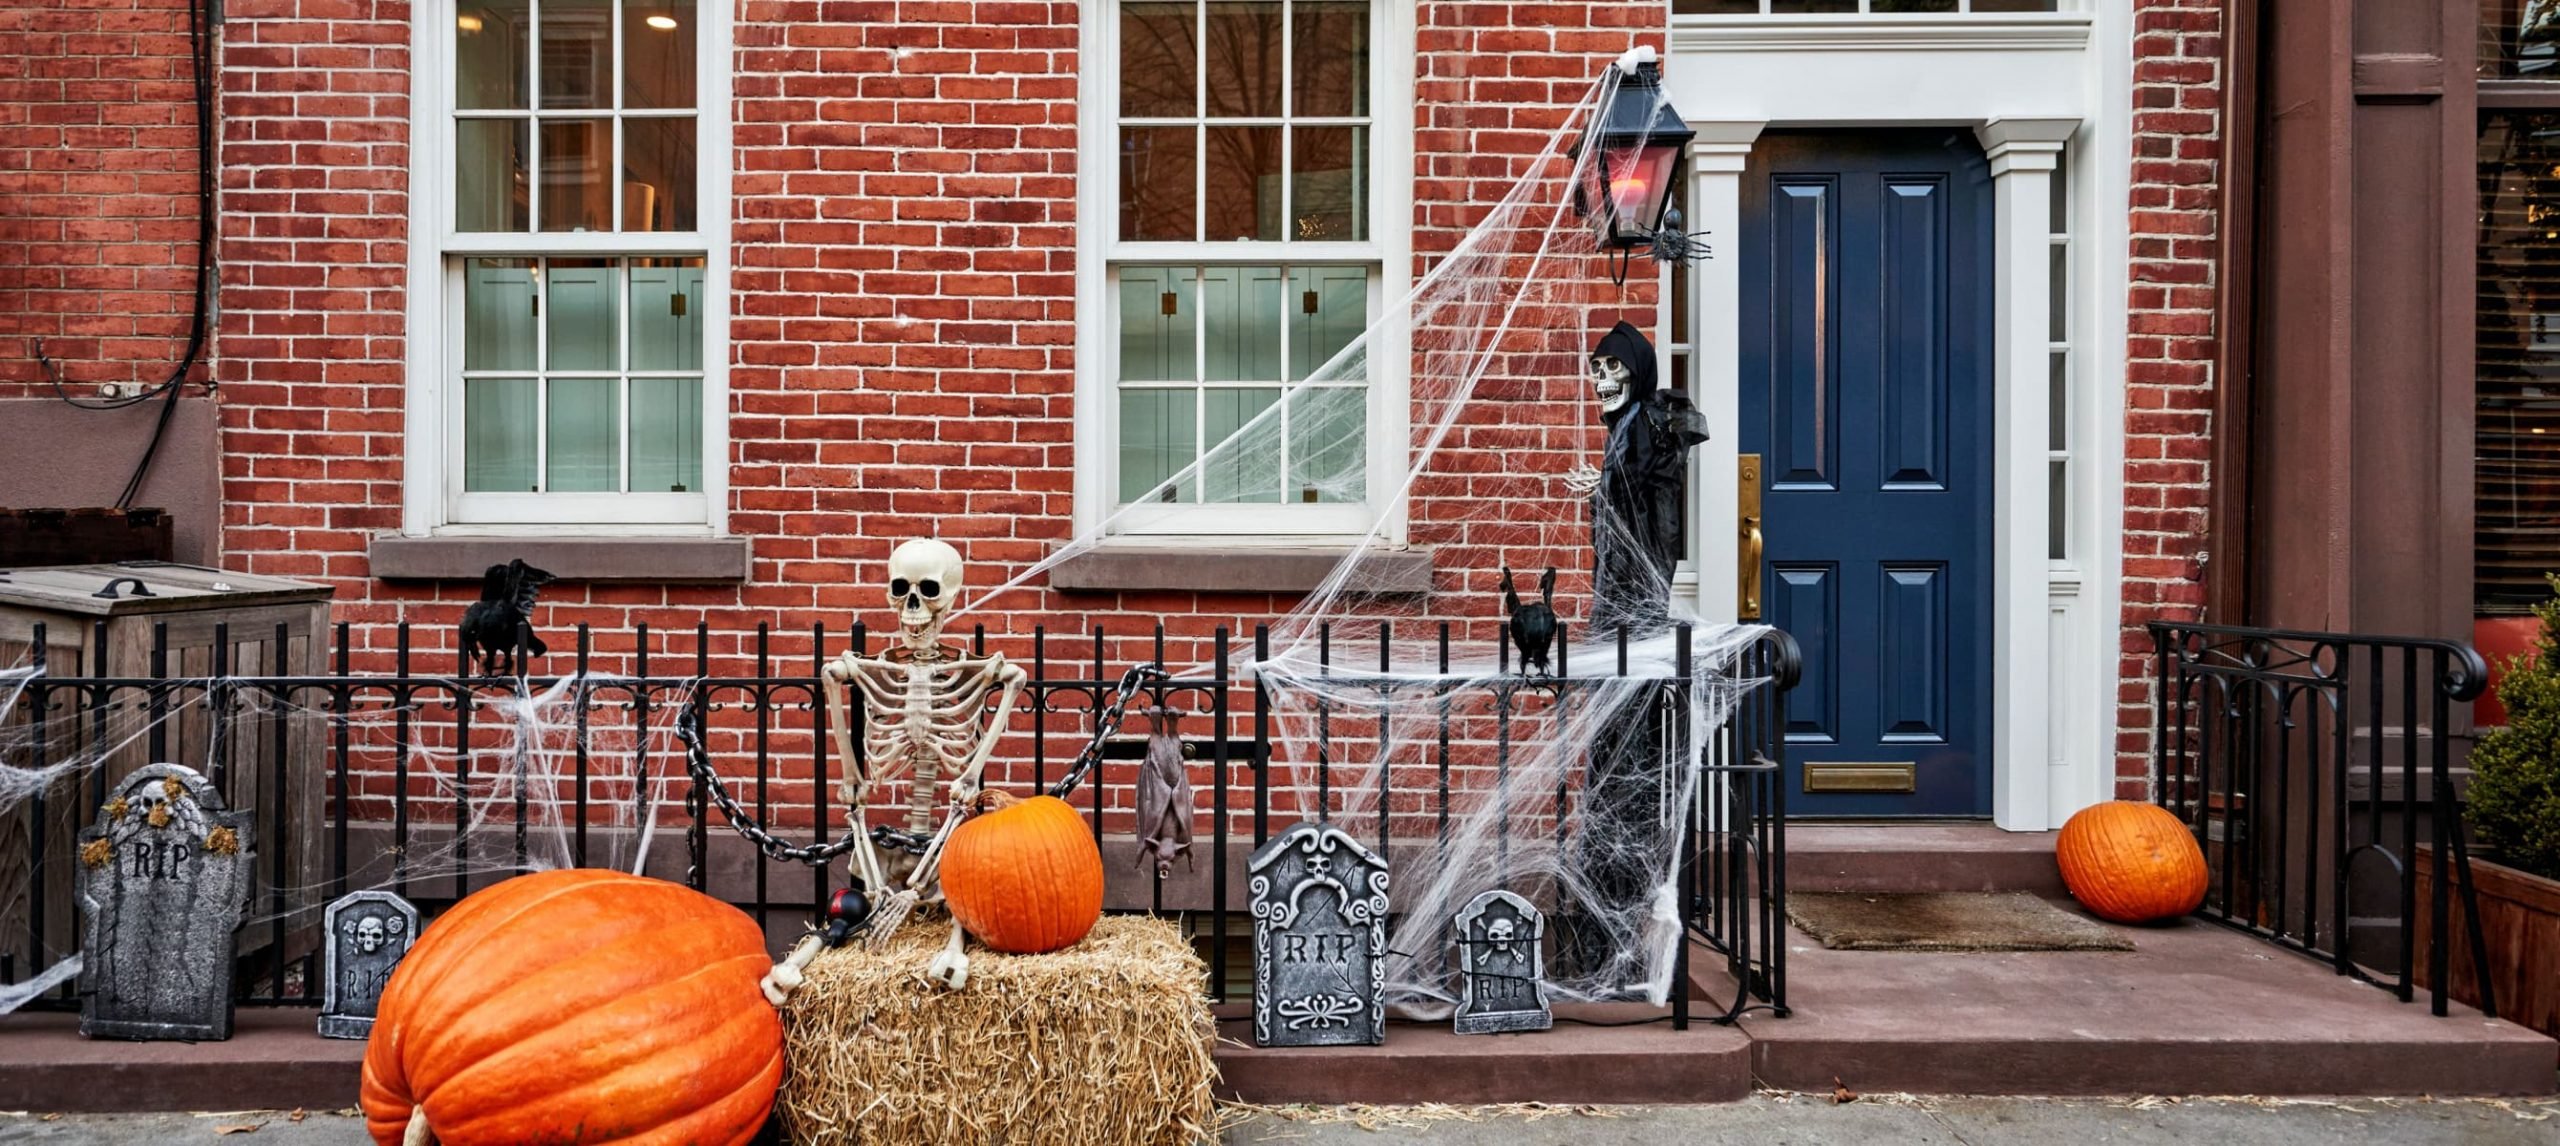 Best Halloween Cities To Visit In The US post thumbnail image